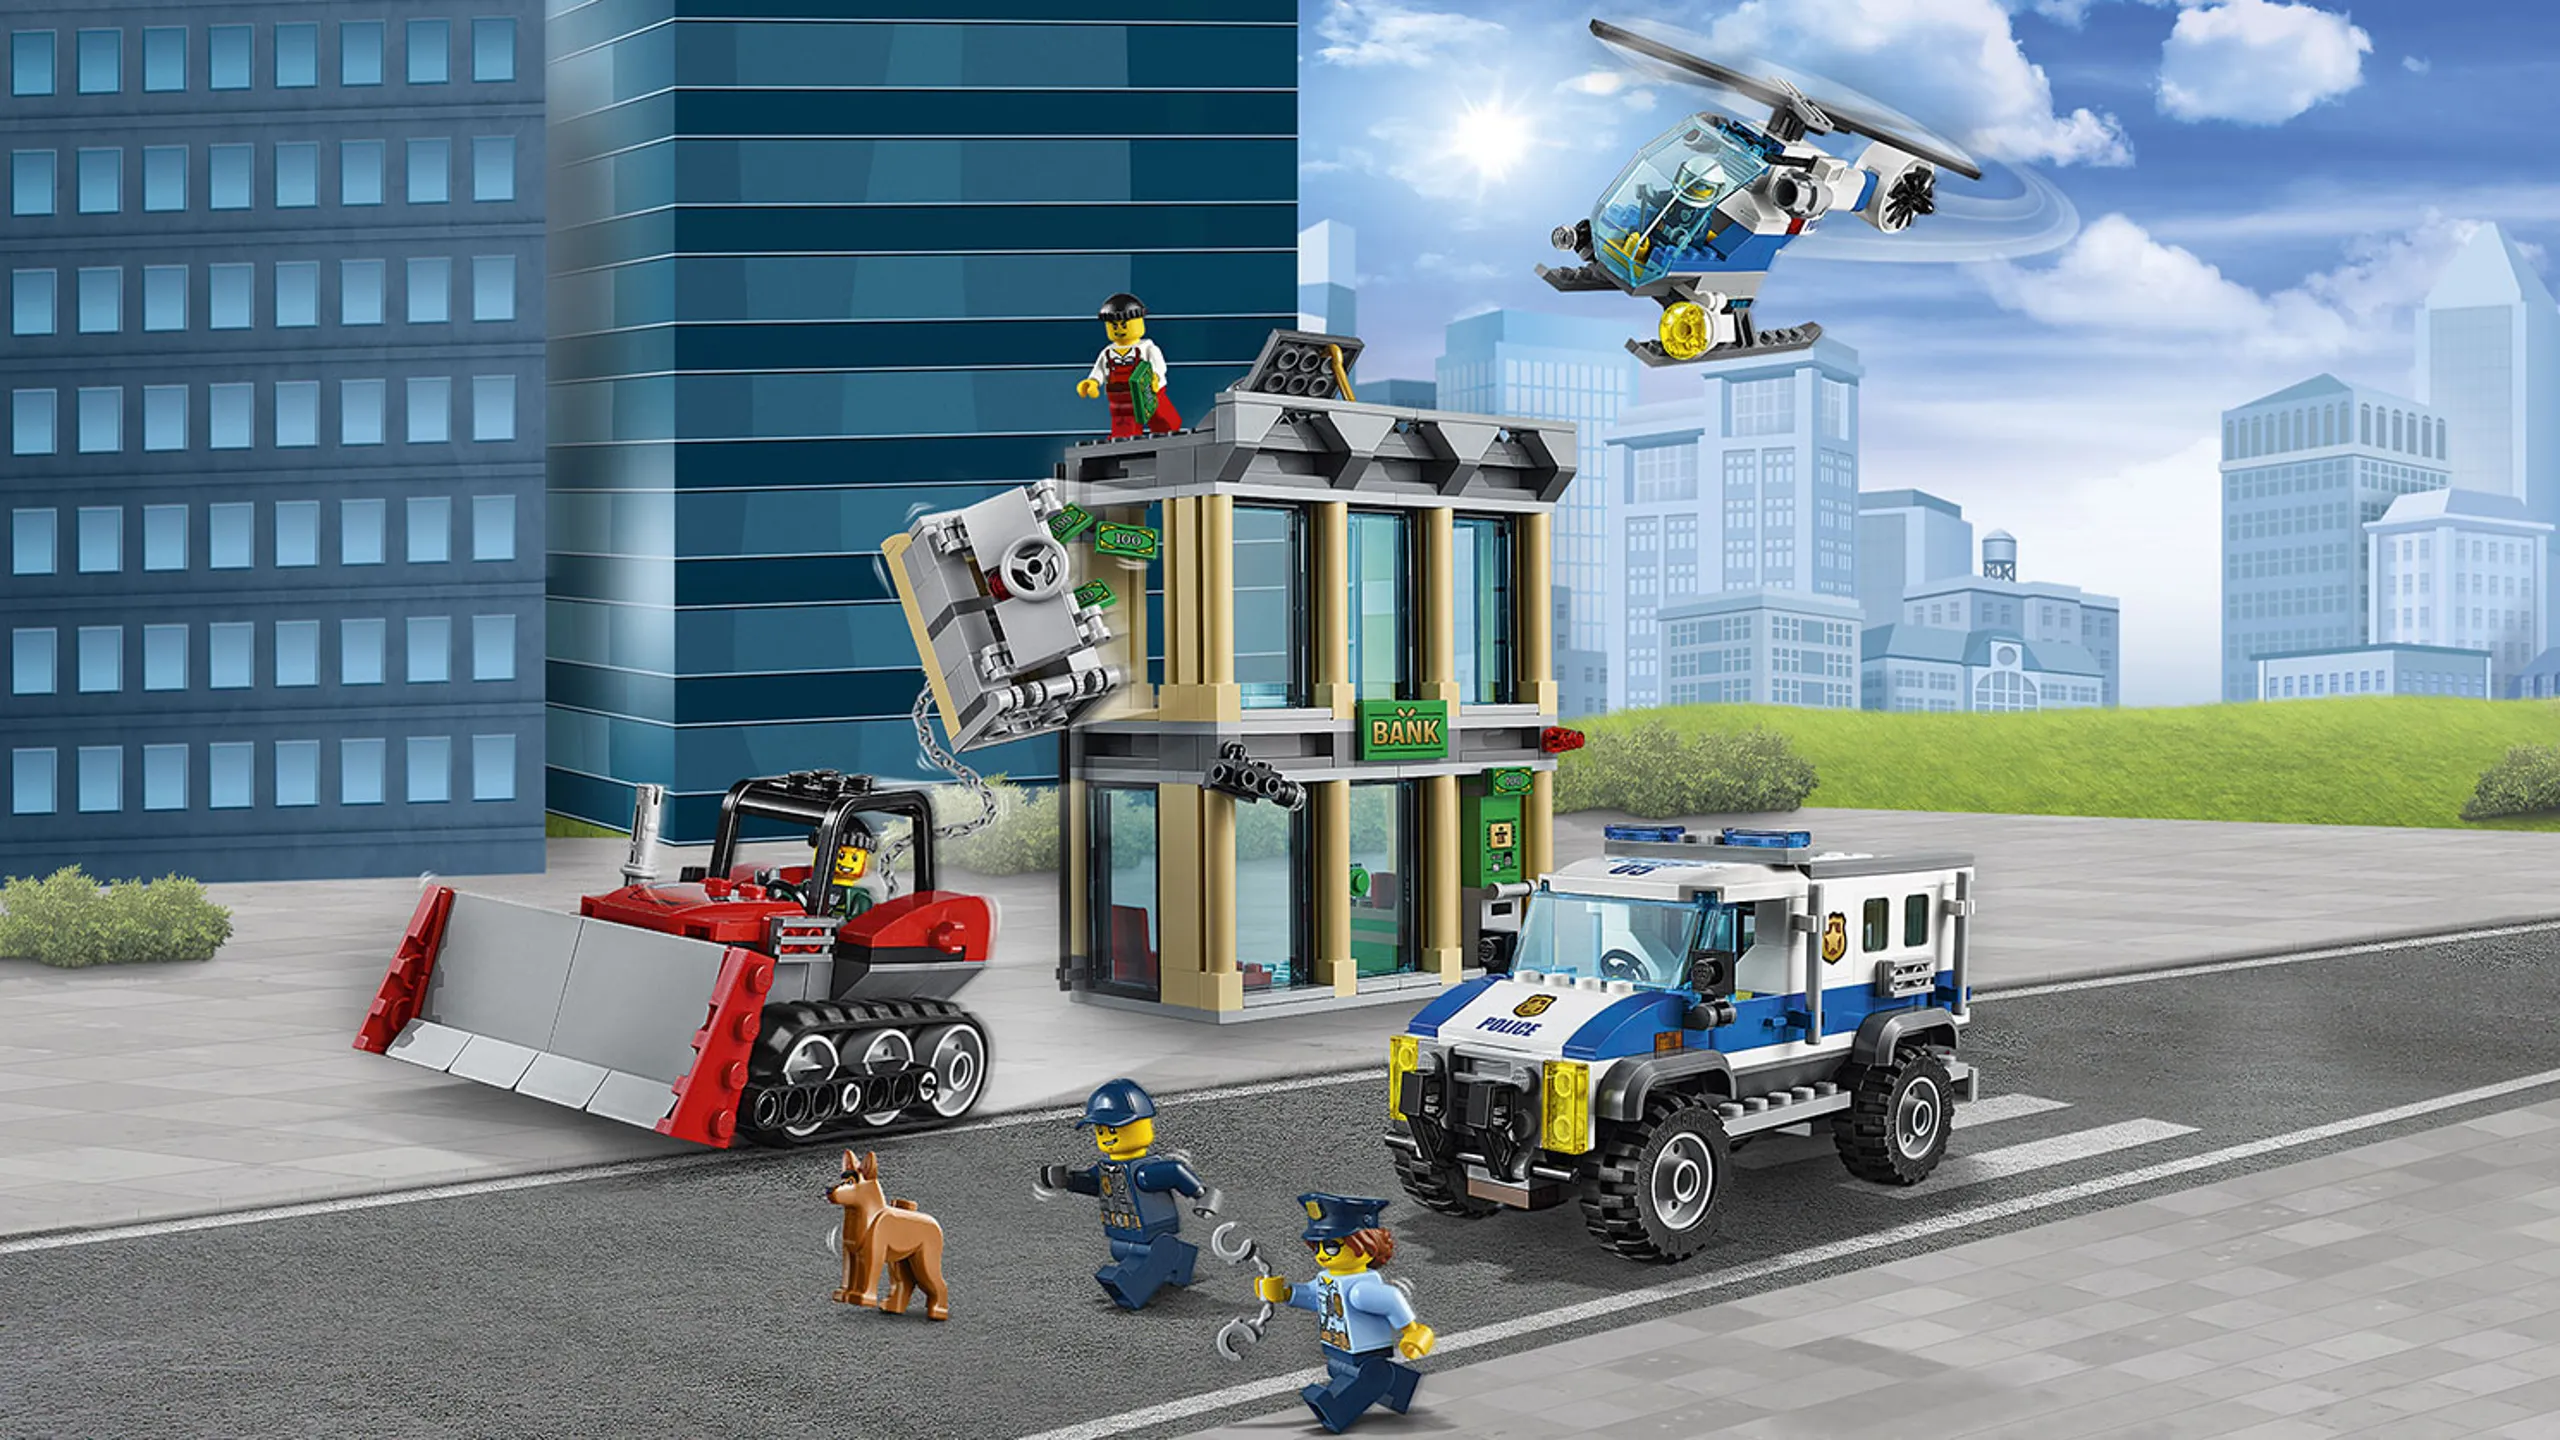 LEGO City Police - 60140 Bulldozer Break-In - The crook uses a bulldozer to steal a safe from the bank and the police is ready to chase him!